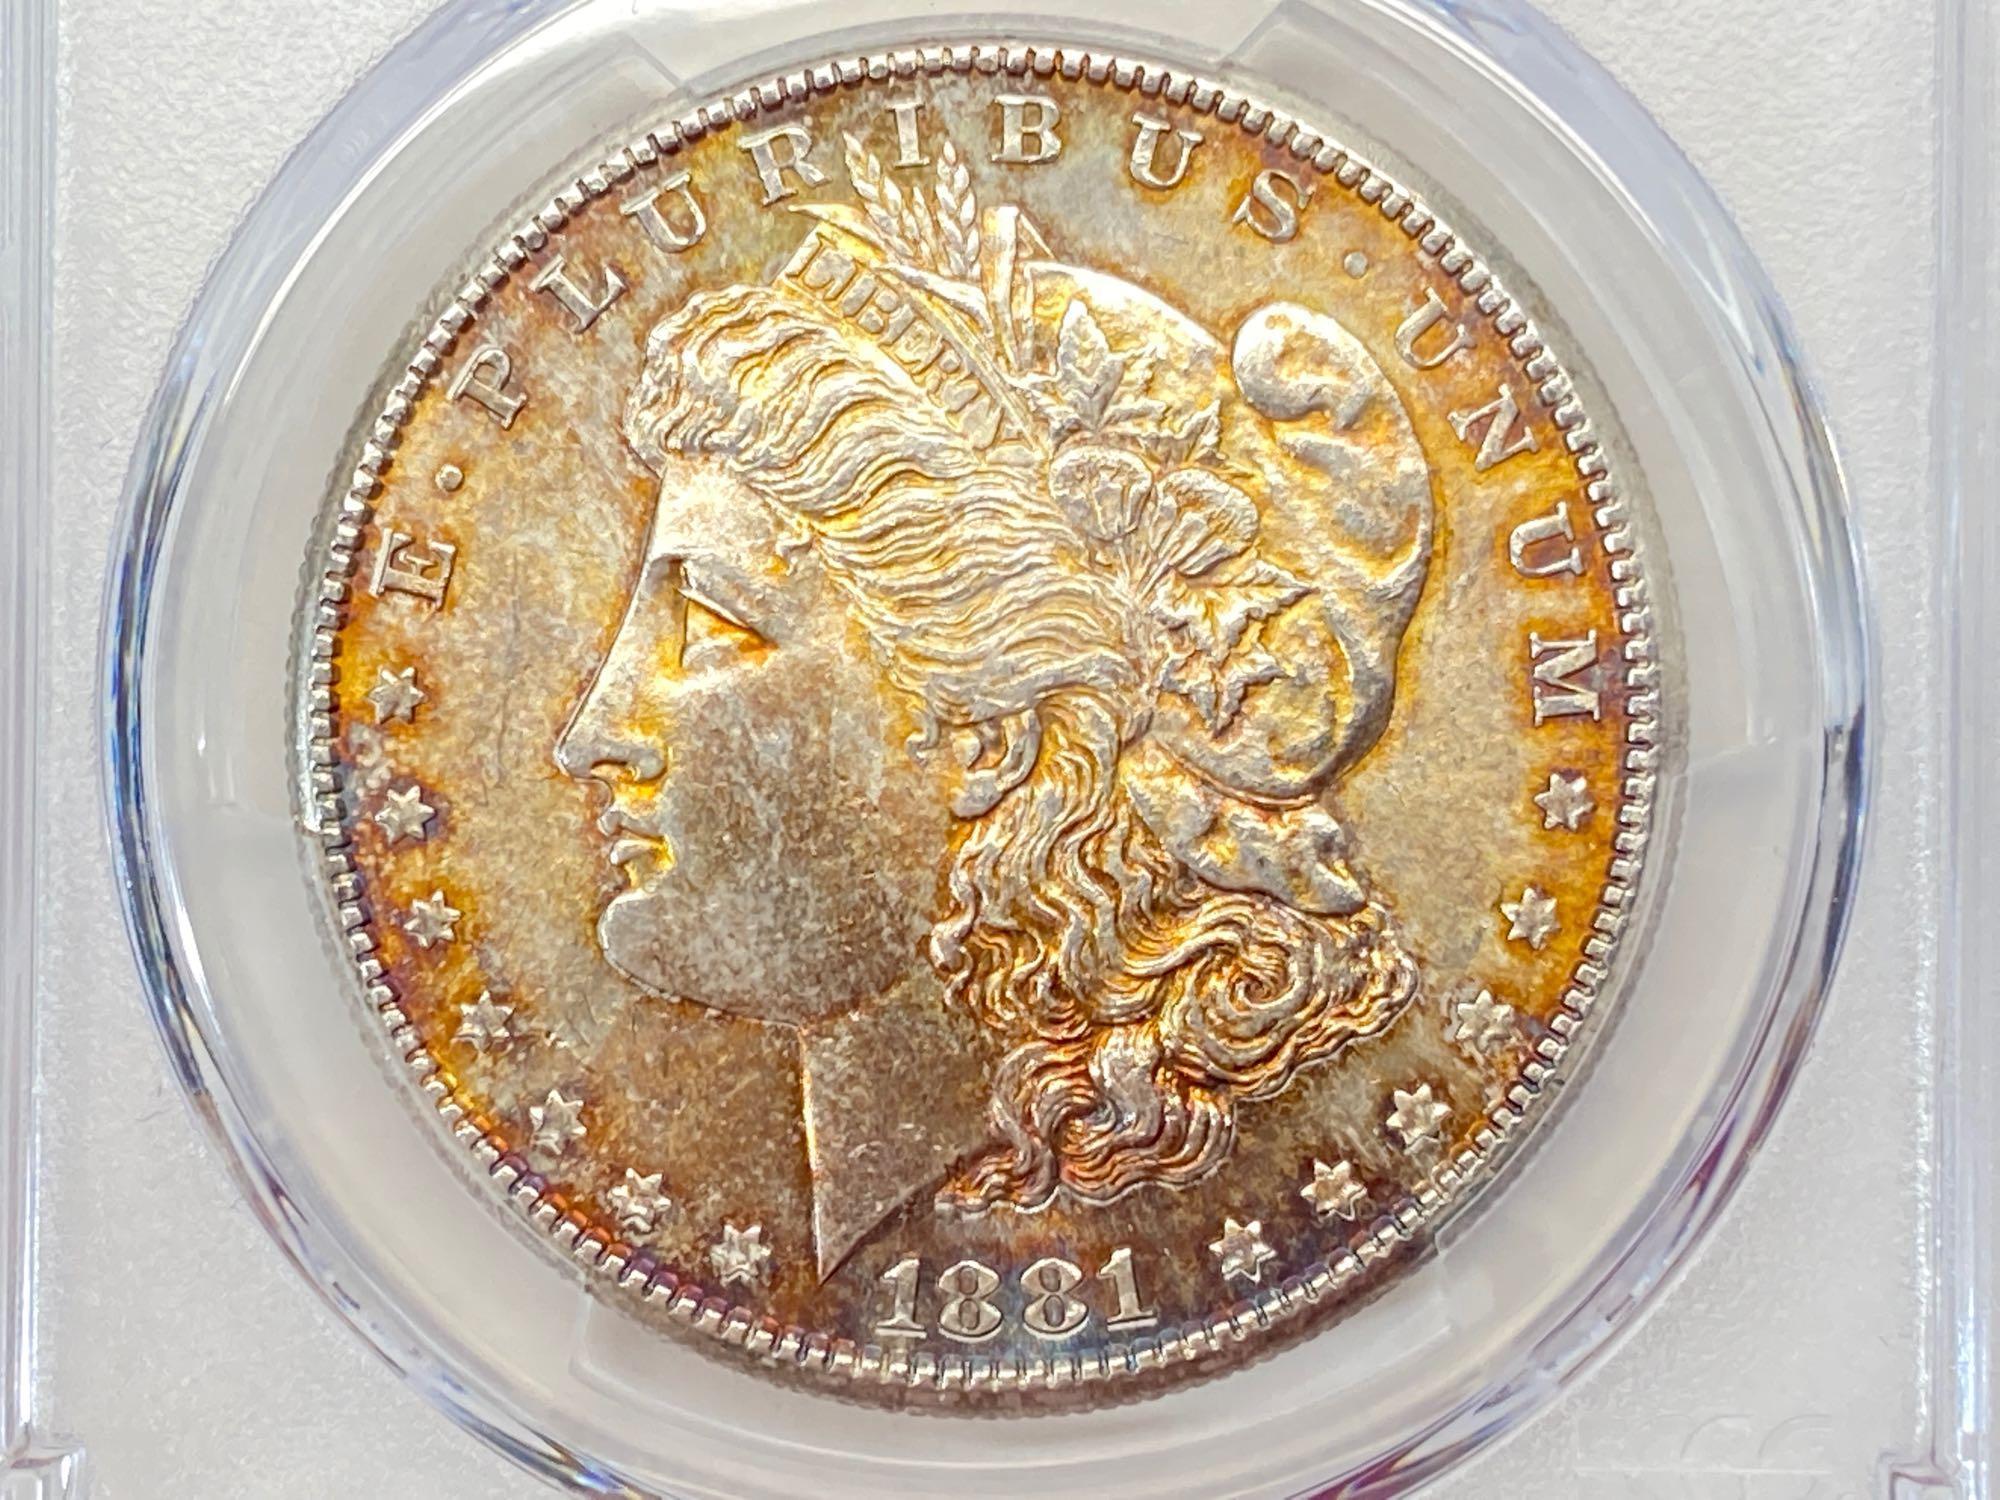 1881-S Morgan Dollar, PCGS Graded MS62, United States silver dollar coin